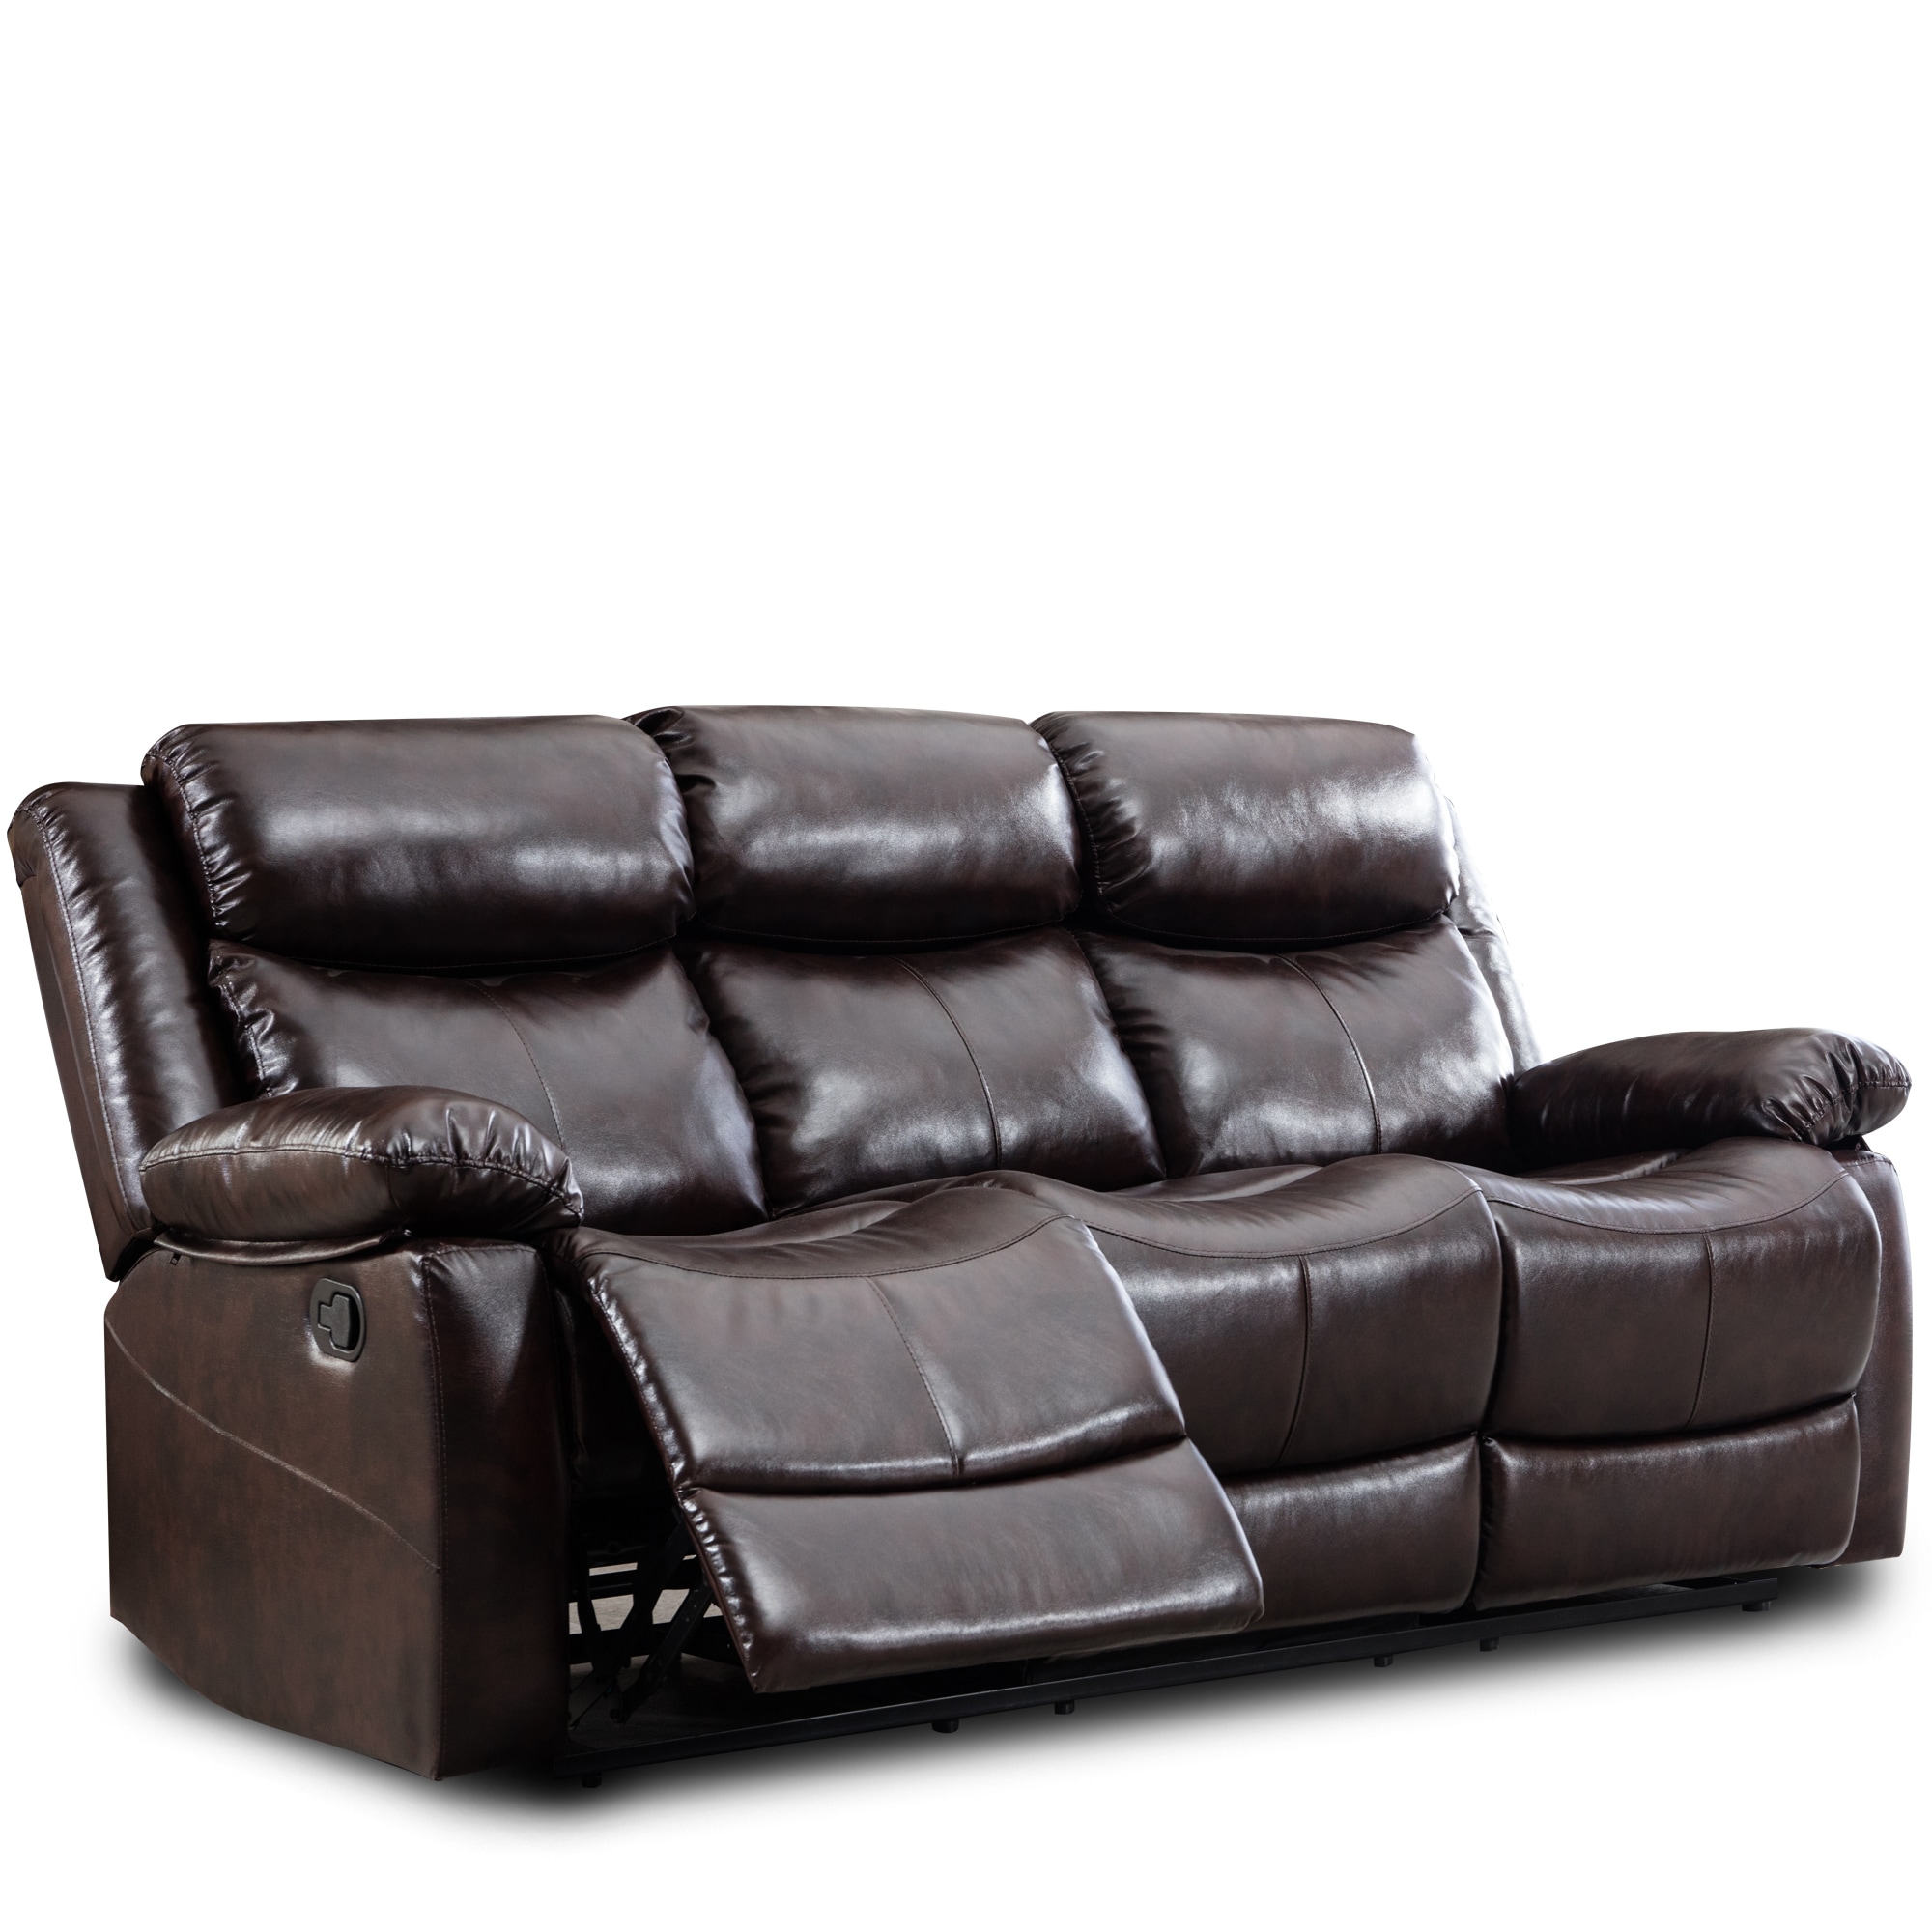 Casainc Brown Pu Leather Sectional, Leather Couch Loveseat And Chair